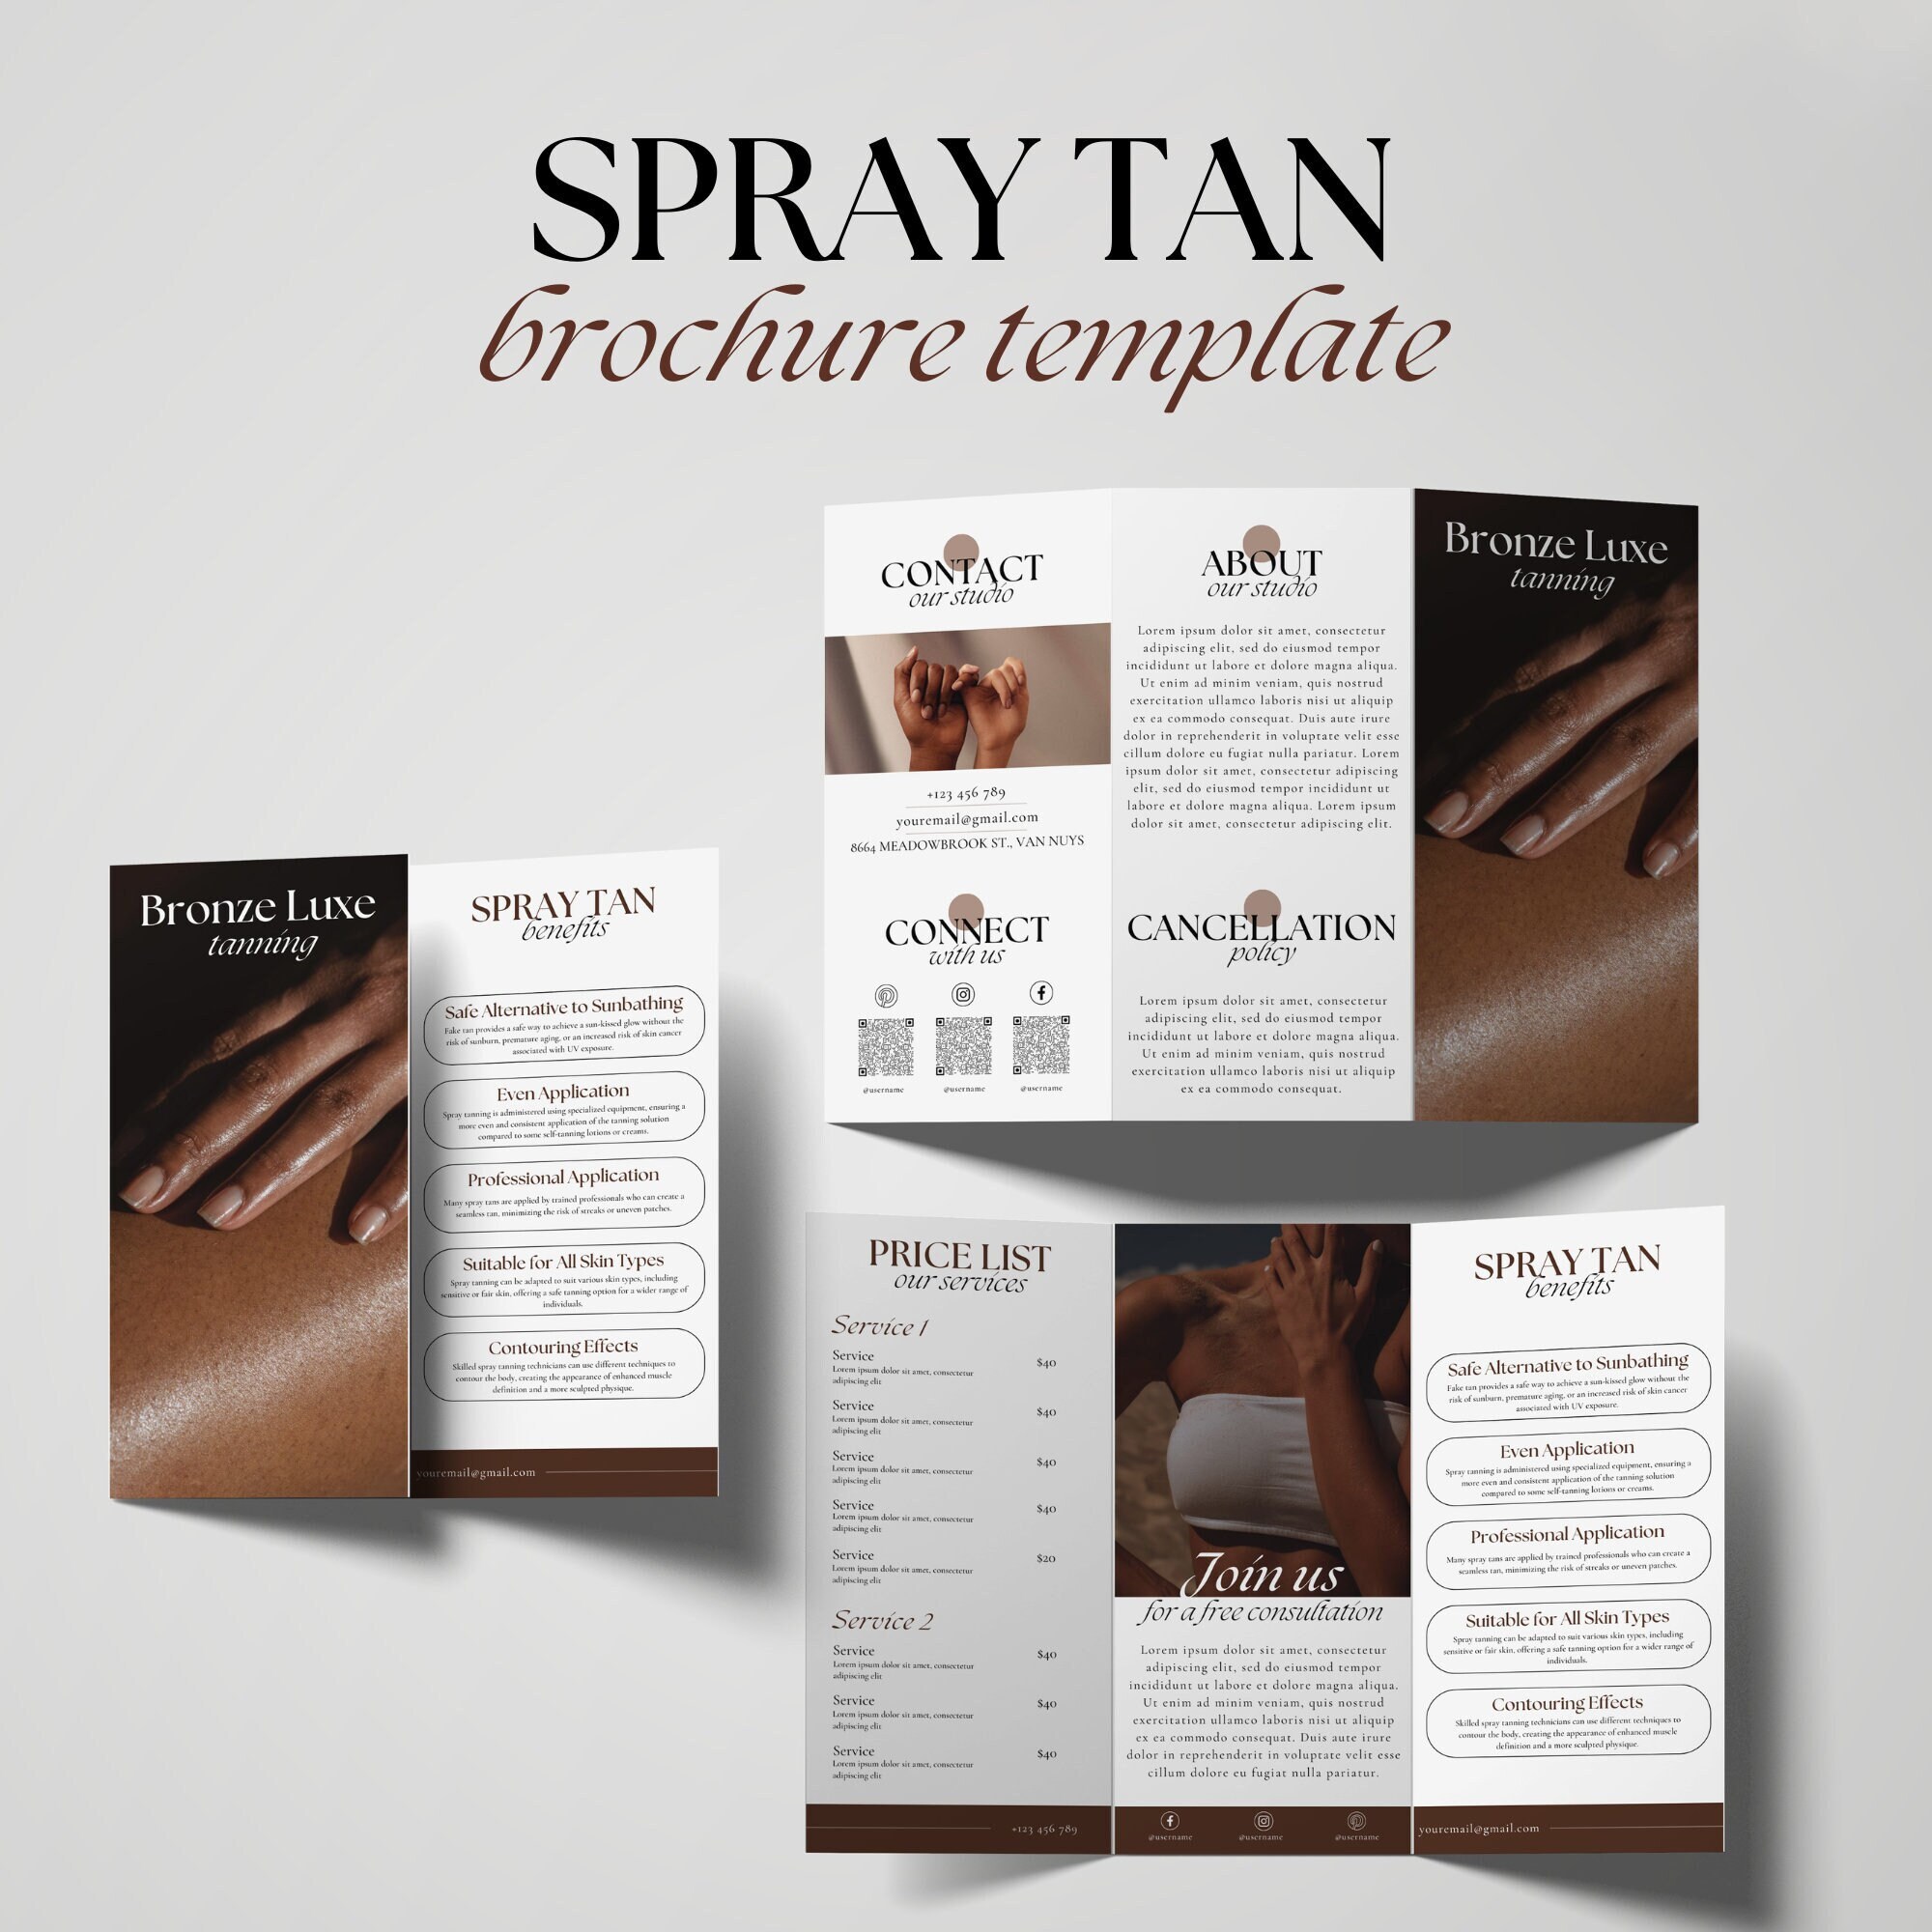 Fake Bake USA - Upgrade your salon services with an Airbrush Tanning  Package! Save $250 off this professional tanning package that includes  everything you need to increase income with tanning services at